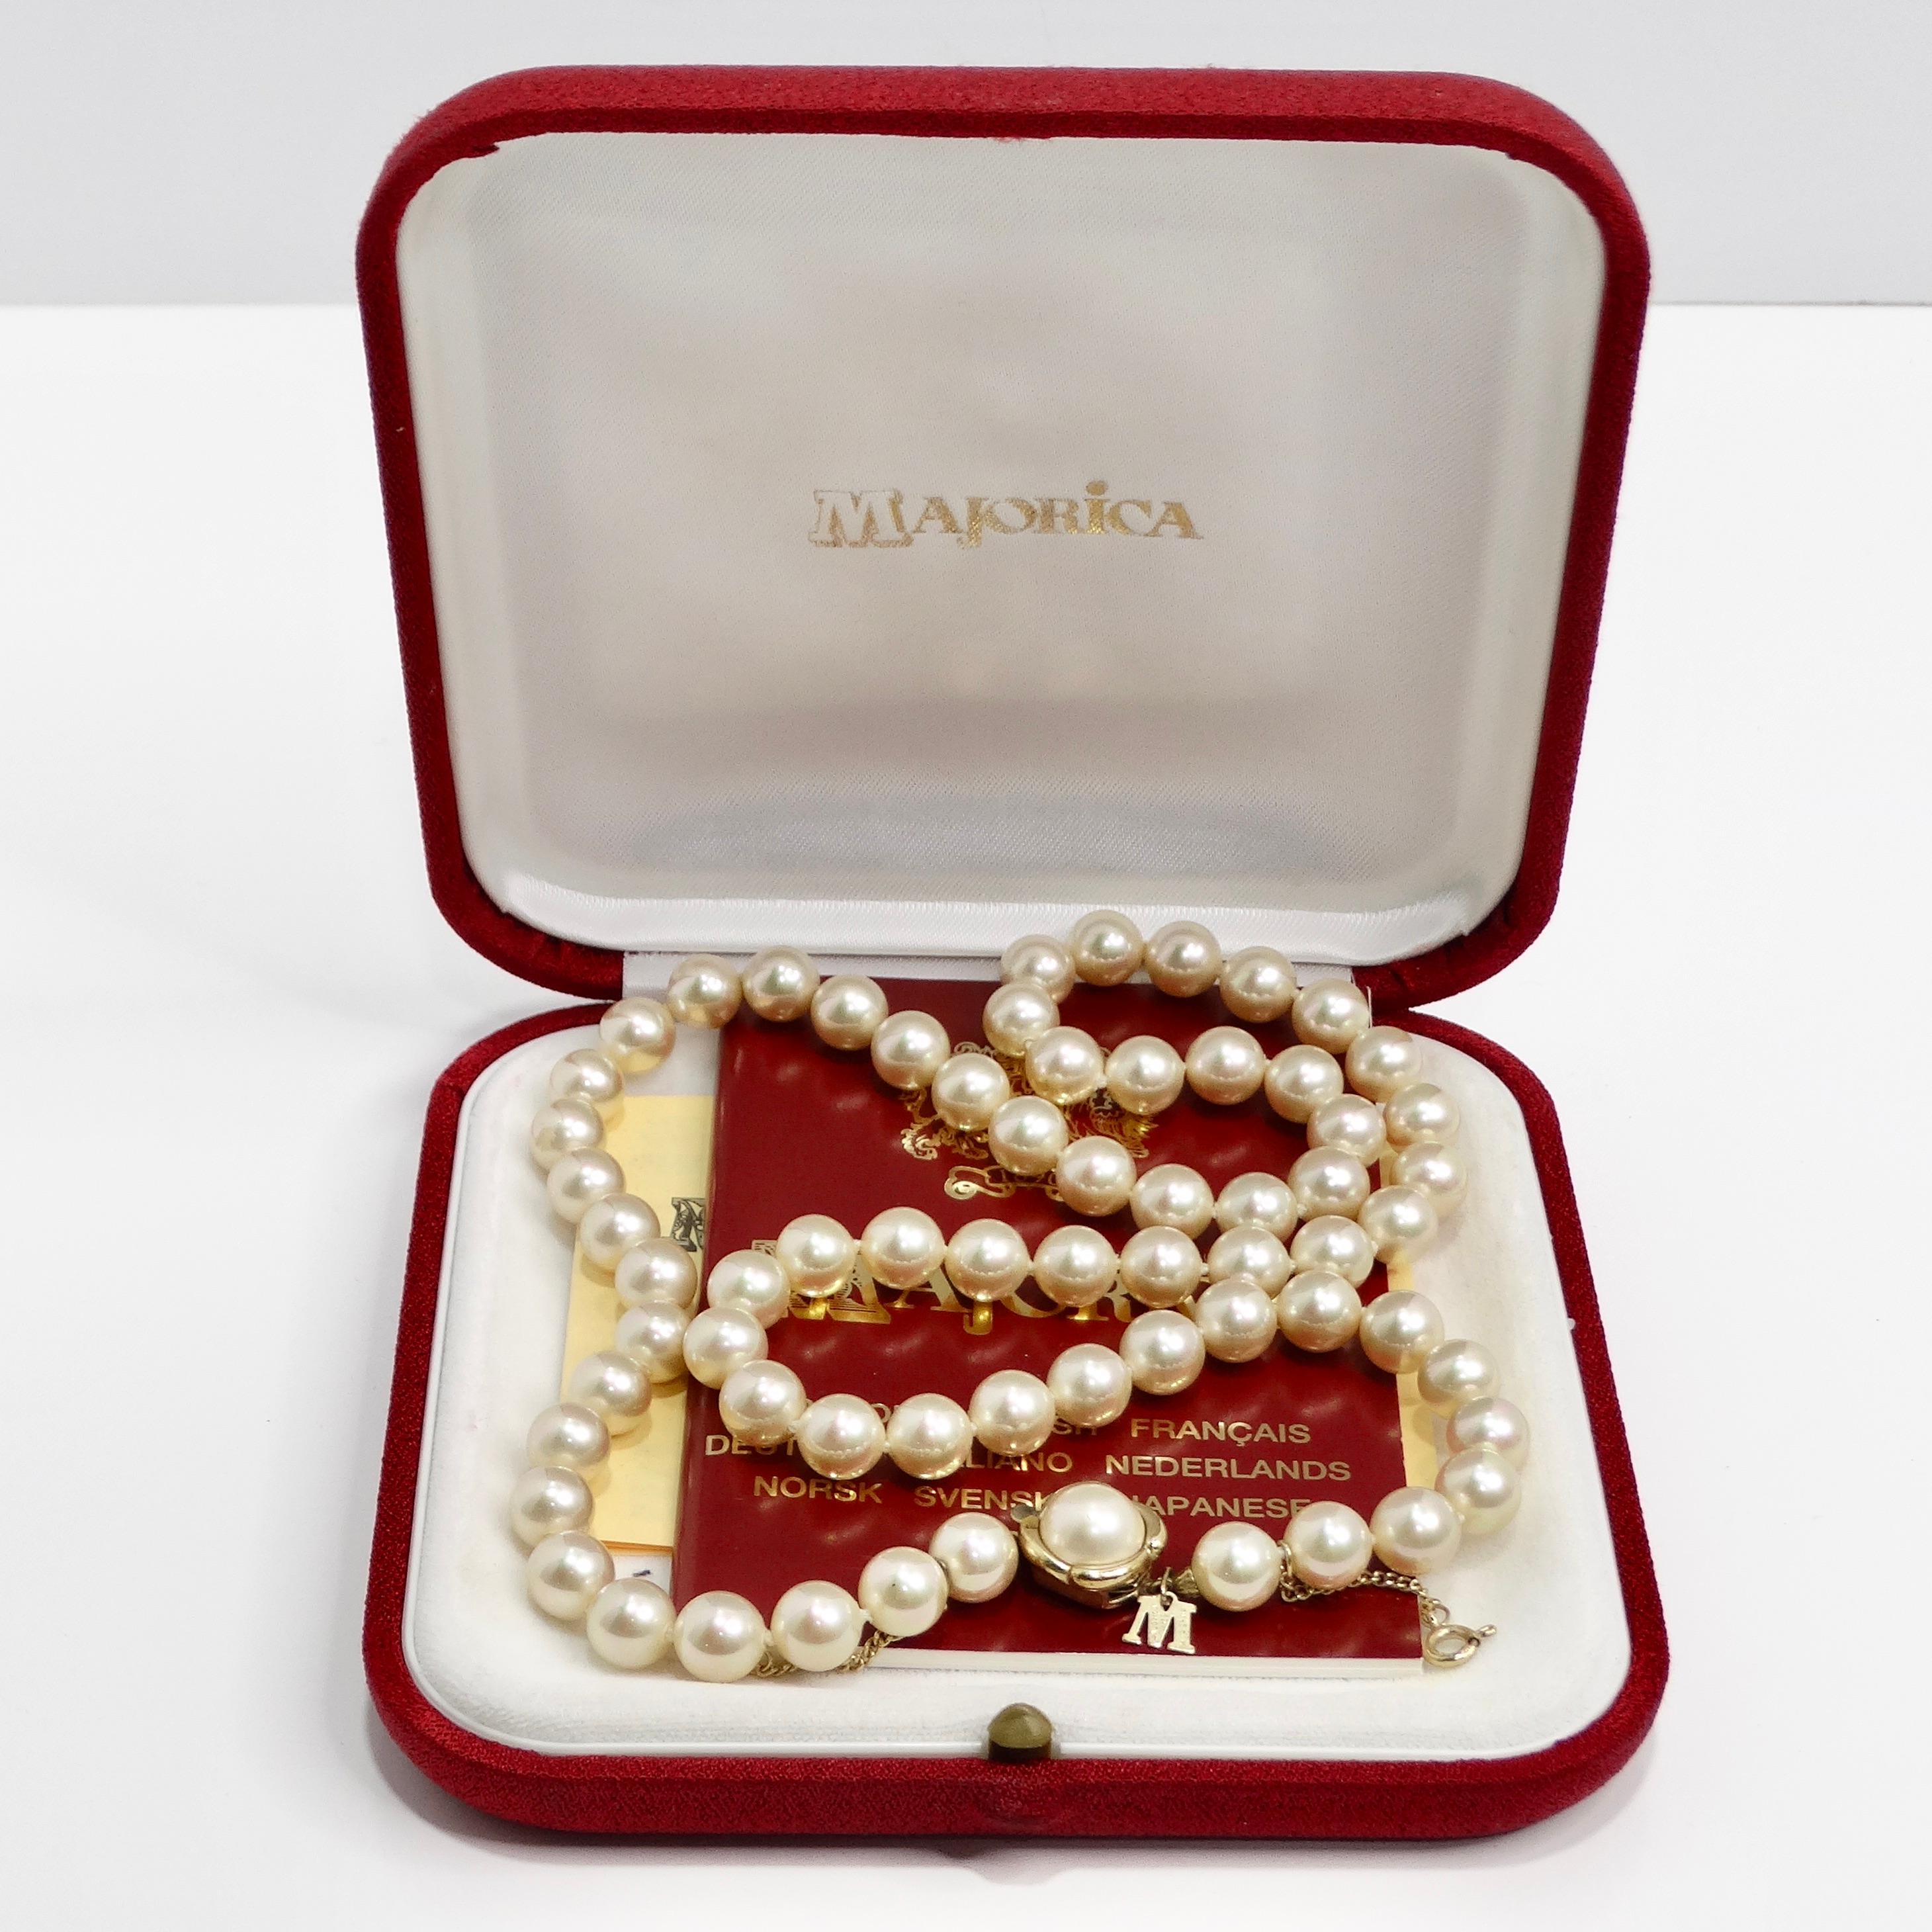 Introducing the Majorca 1980s Silver Pearl Necklace, a vintage classic that exudes timeless elegance and sophistication. This exquisite necklace features lustrous white pearls, renowned for their uniform shape and smooth surface, providing a touch